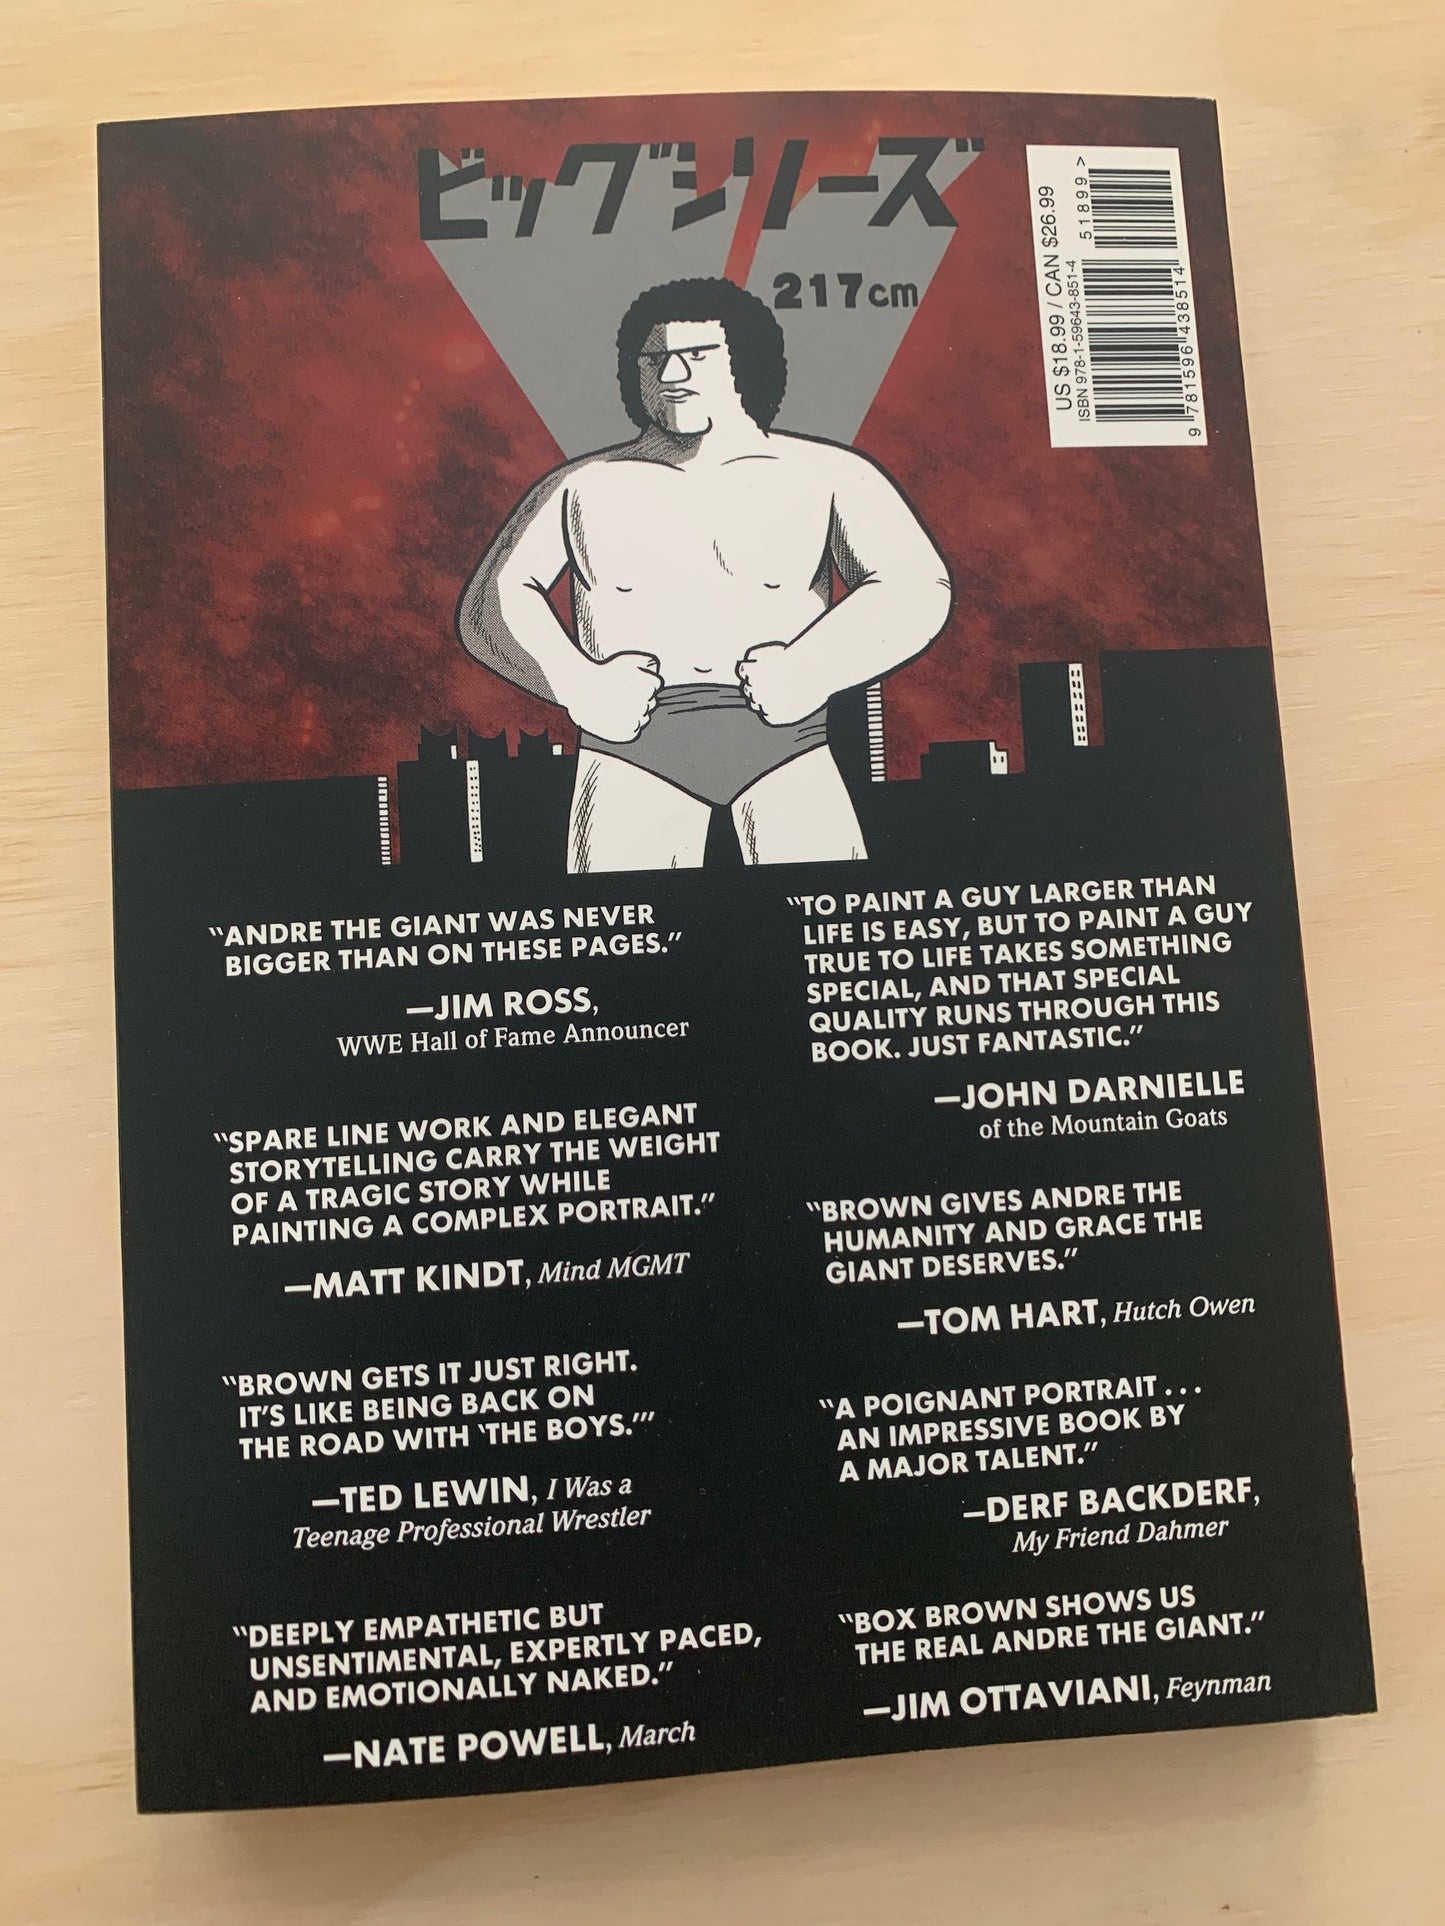 Andre the Giant: Life and Legend